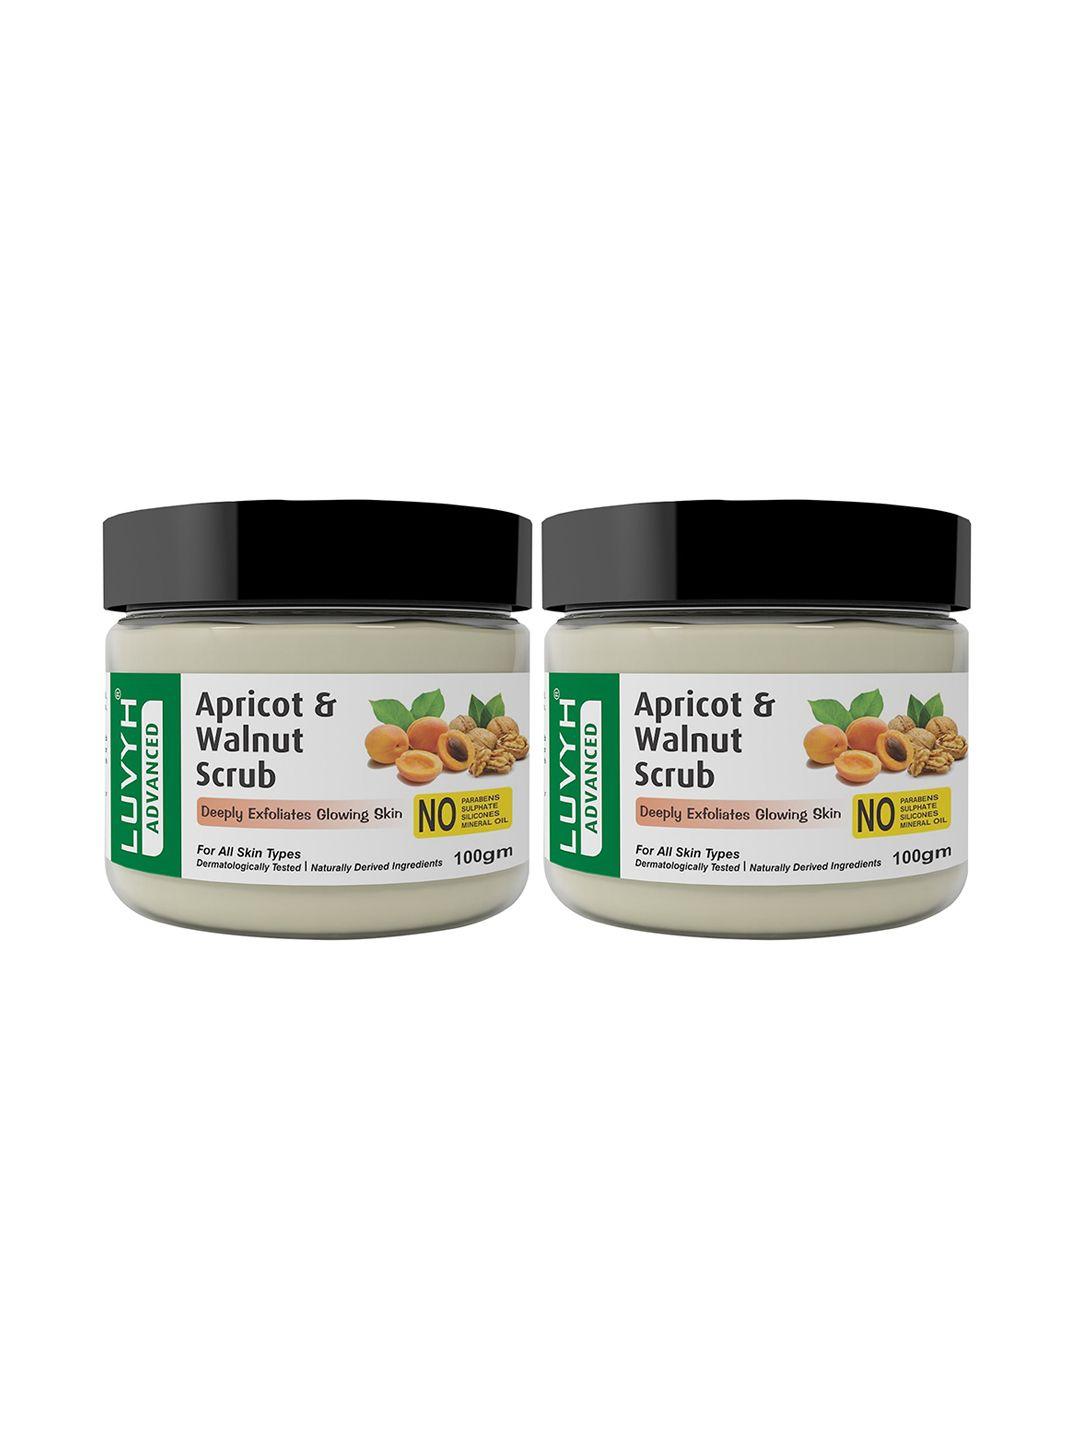 luvyh advanced set of 2 apricot & walnut scrubs for all skin types - 100 g each